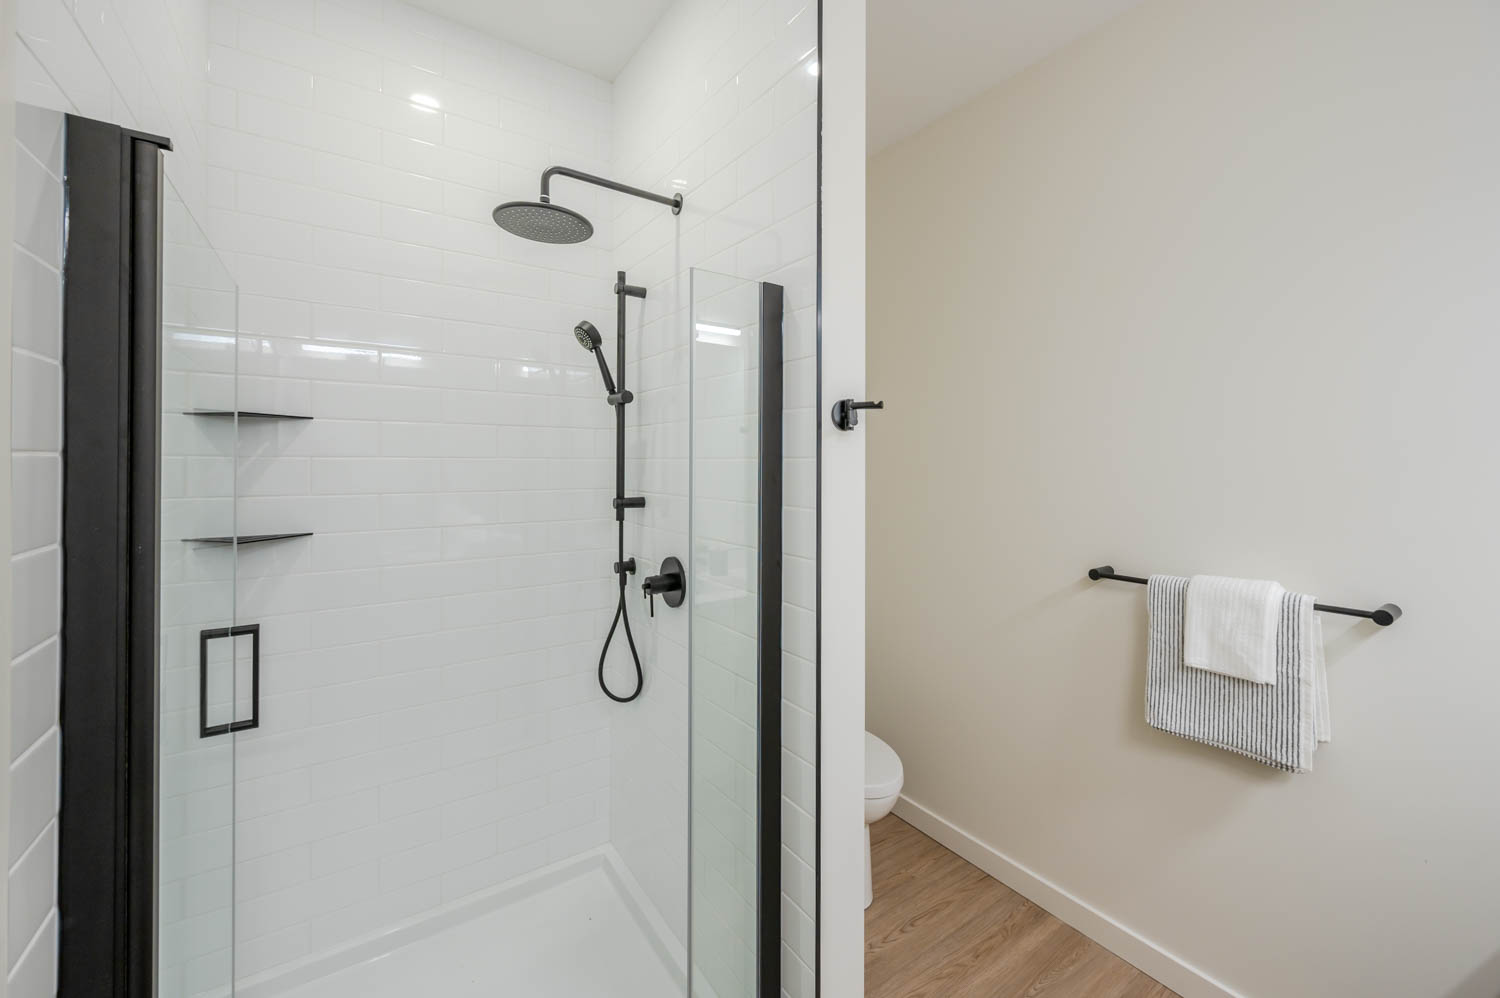 Bathroom with shower, toilet, and towel rack